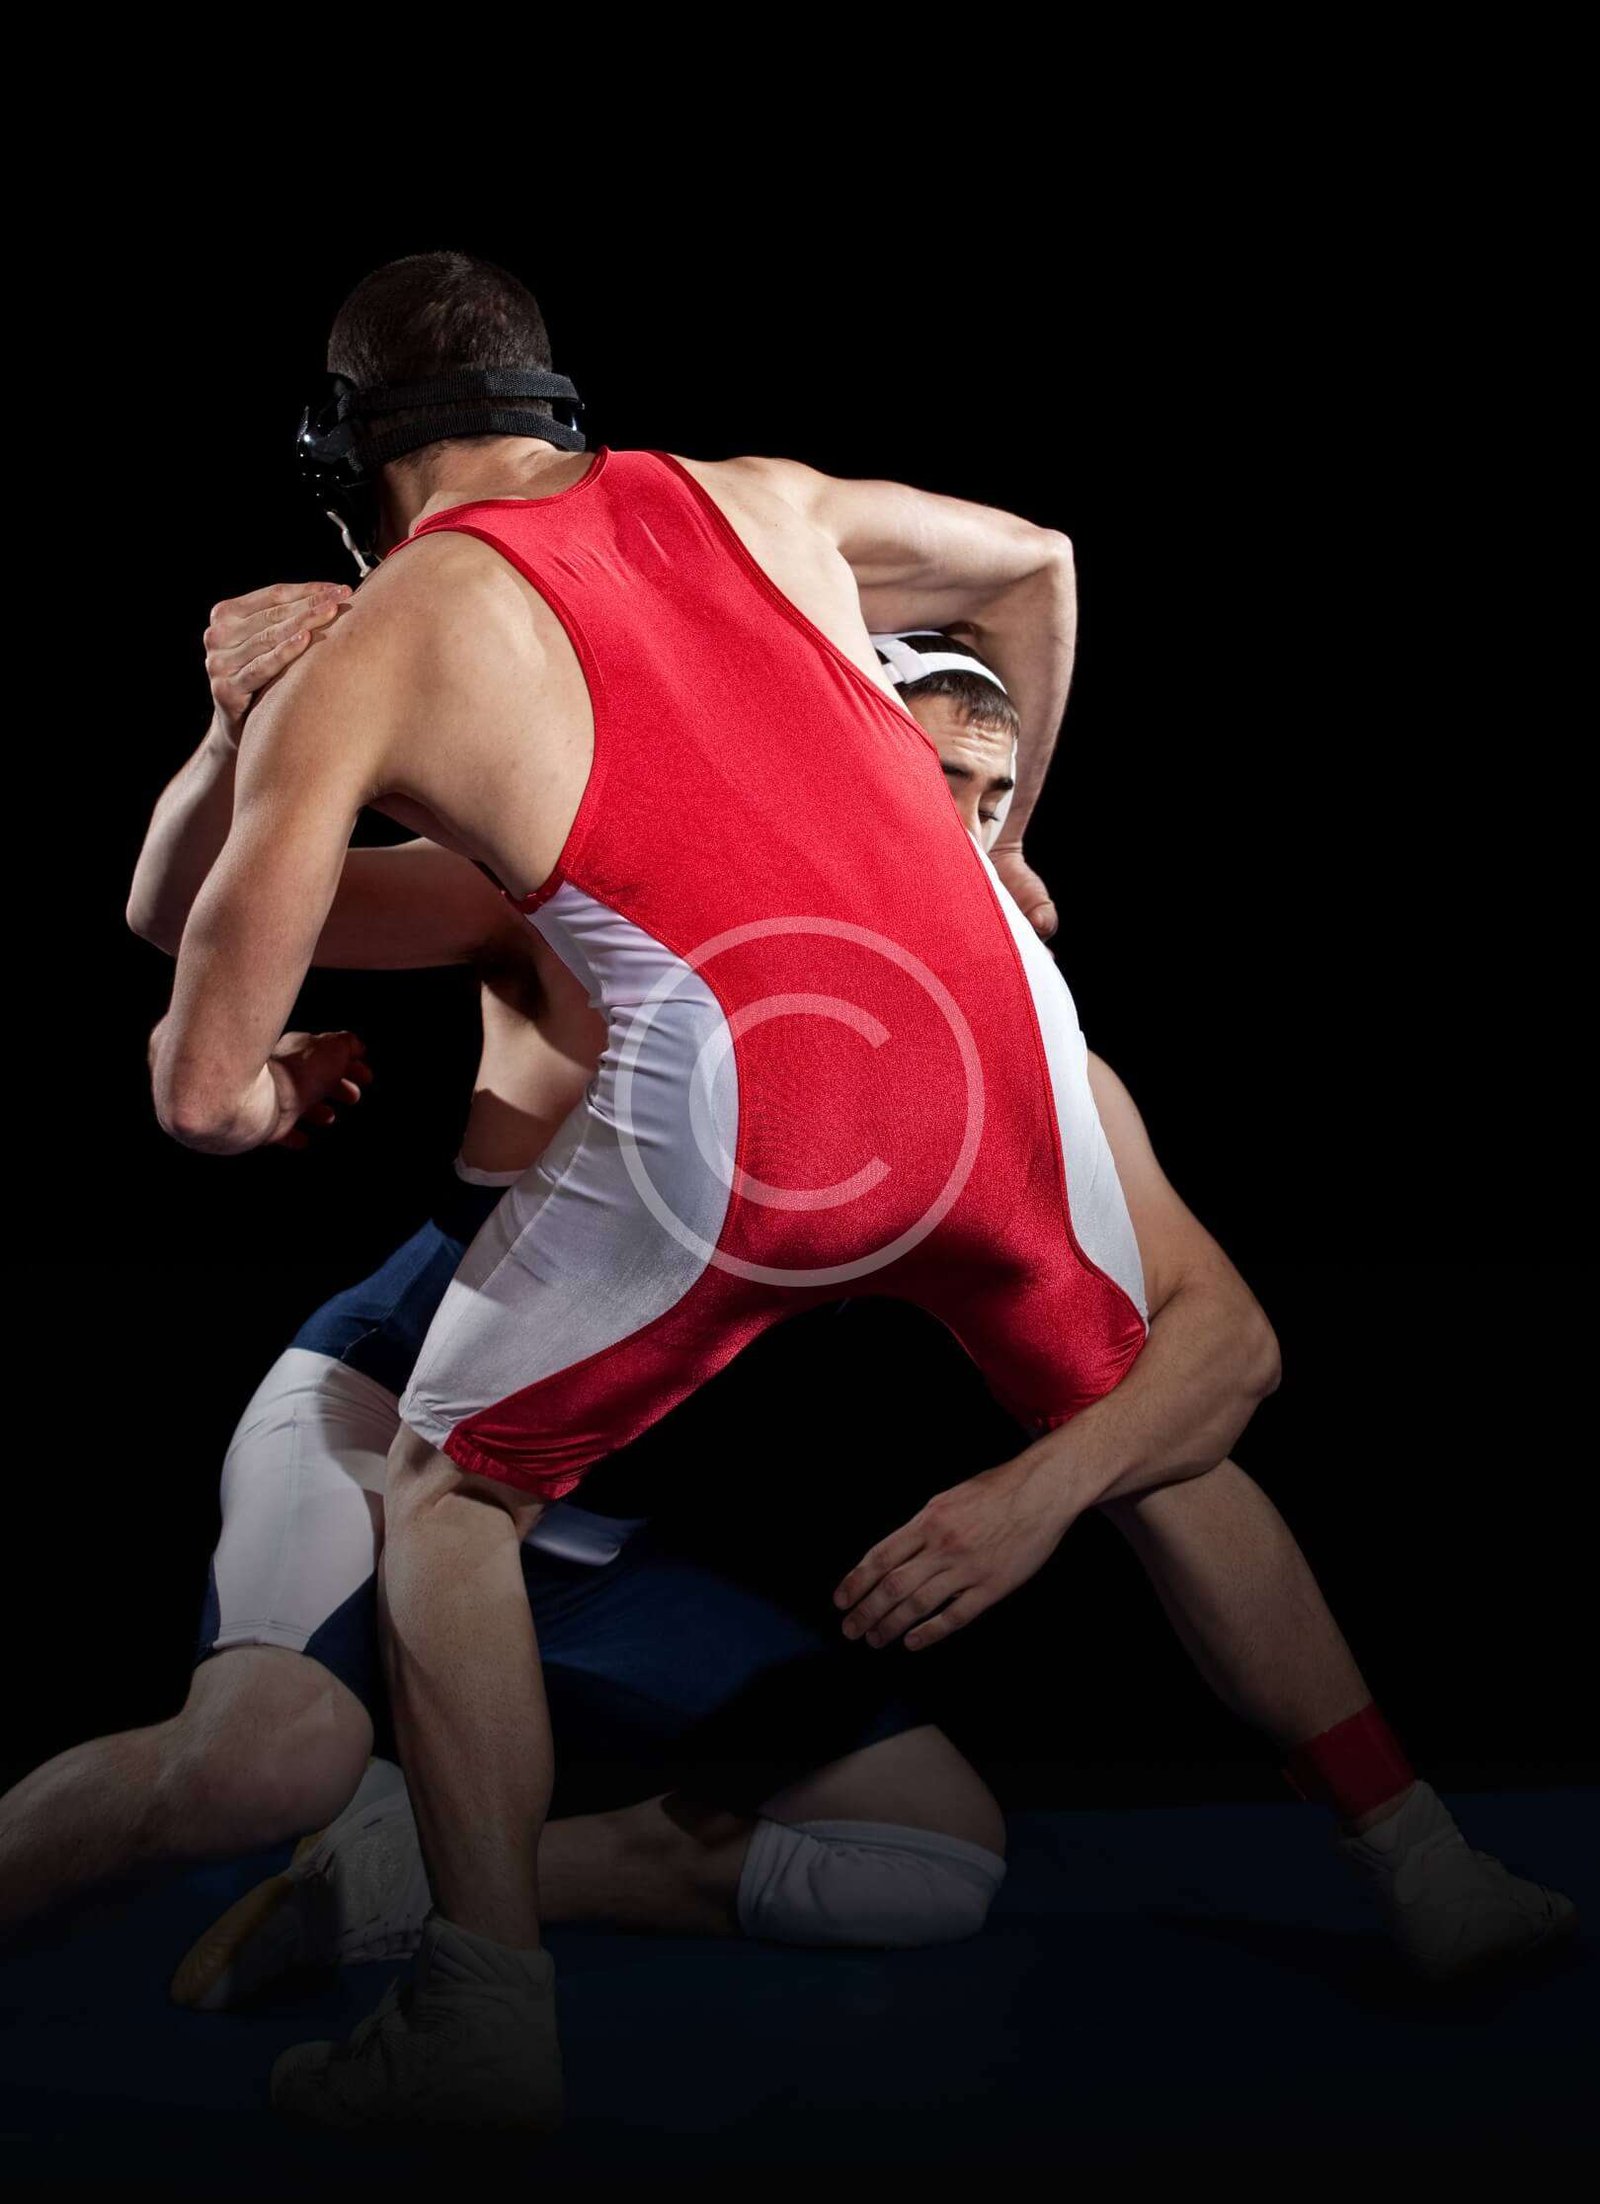 Two Wrestling fighters Showing Their Skills on the Mat